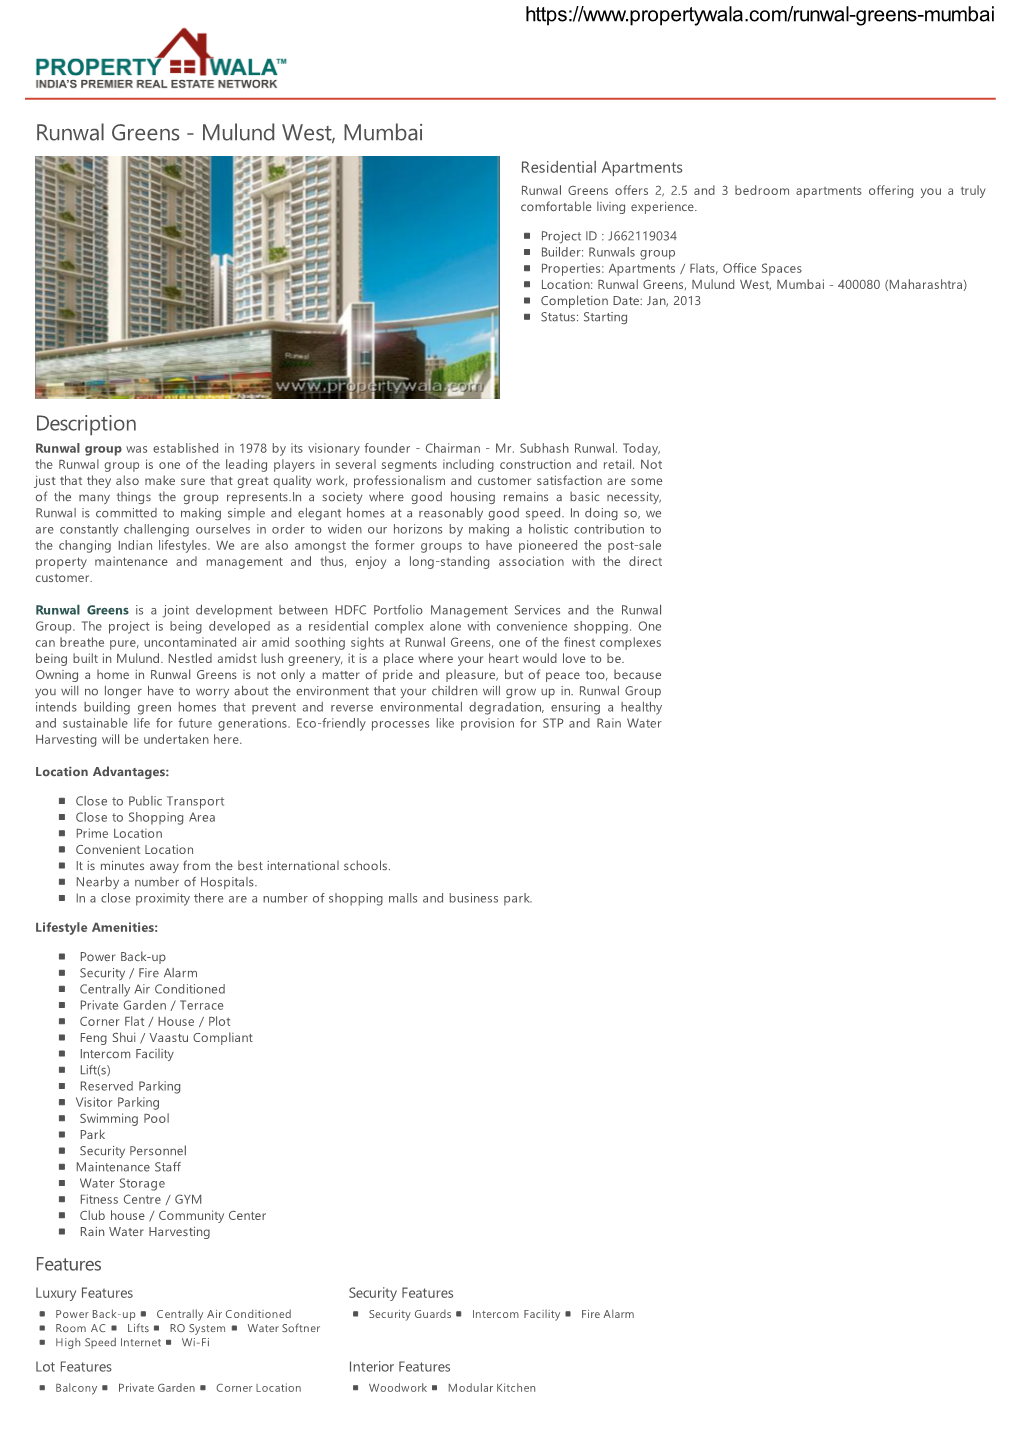 Runwal Greens - Mulund West, Mumbai Residential Apartments Runwal Greens Offers 2, 2.5 and 3 Bedroom Apartments Offering You a Truly Comfortable Living Experience